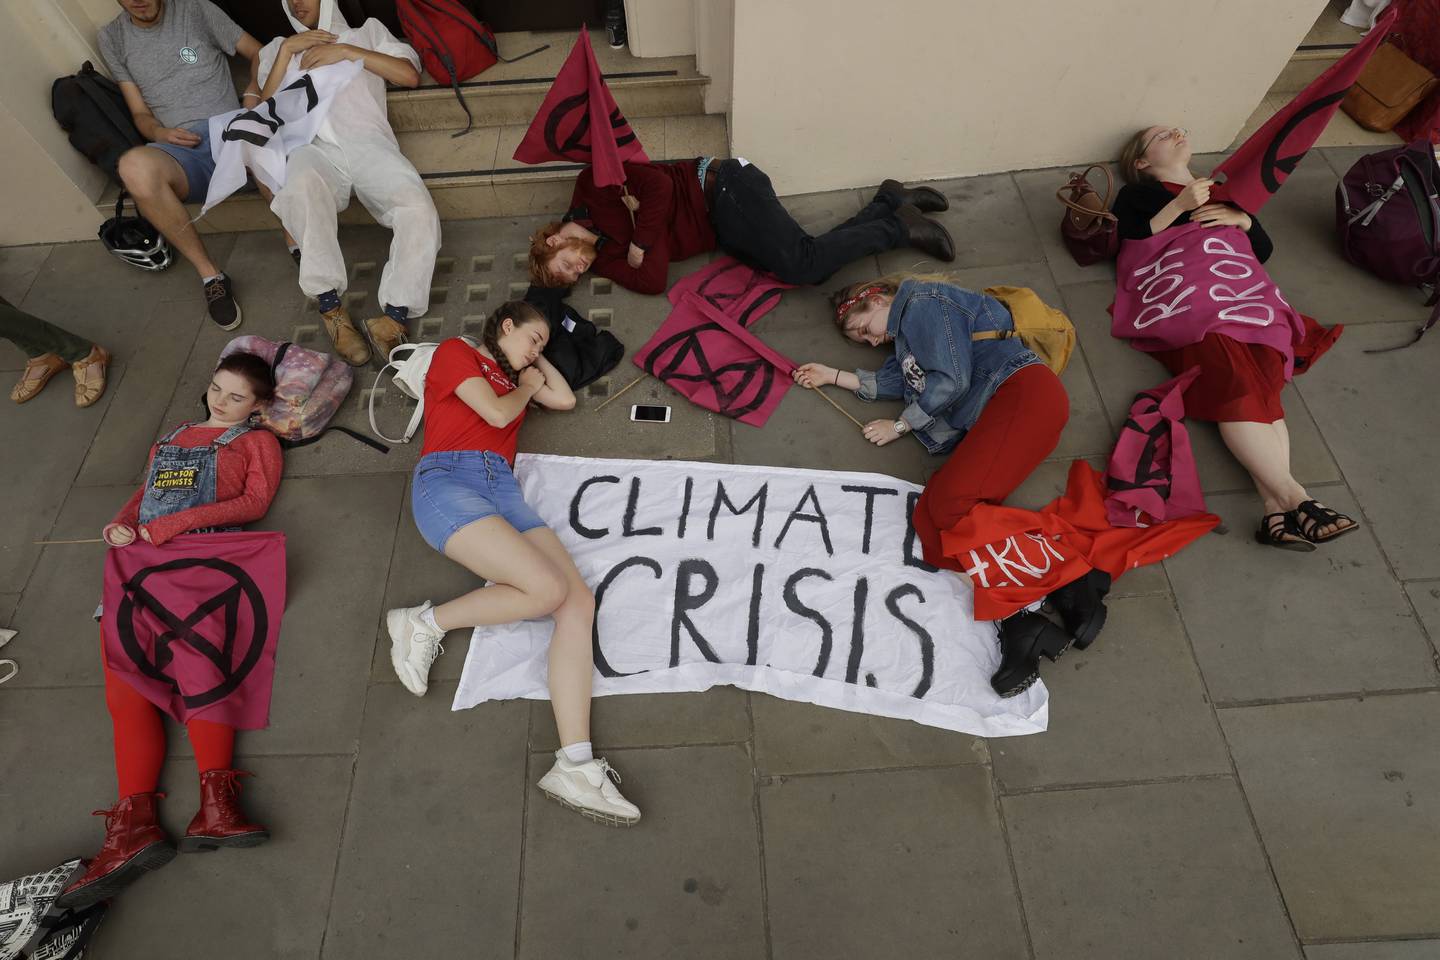 Extinction Rebellion climate change protesters stage a die-in outside the Royal Opera House to demand that they drop oil producer BP as a sponsor, in central London, Tuesday, July 2, 2019. (AP Photo/Matt Dunham)